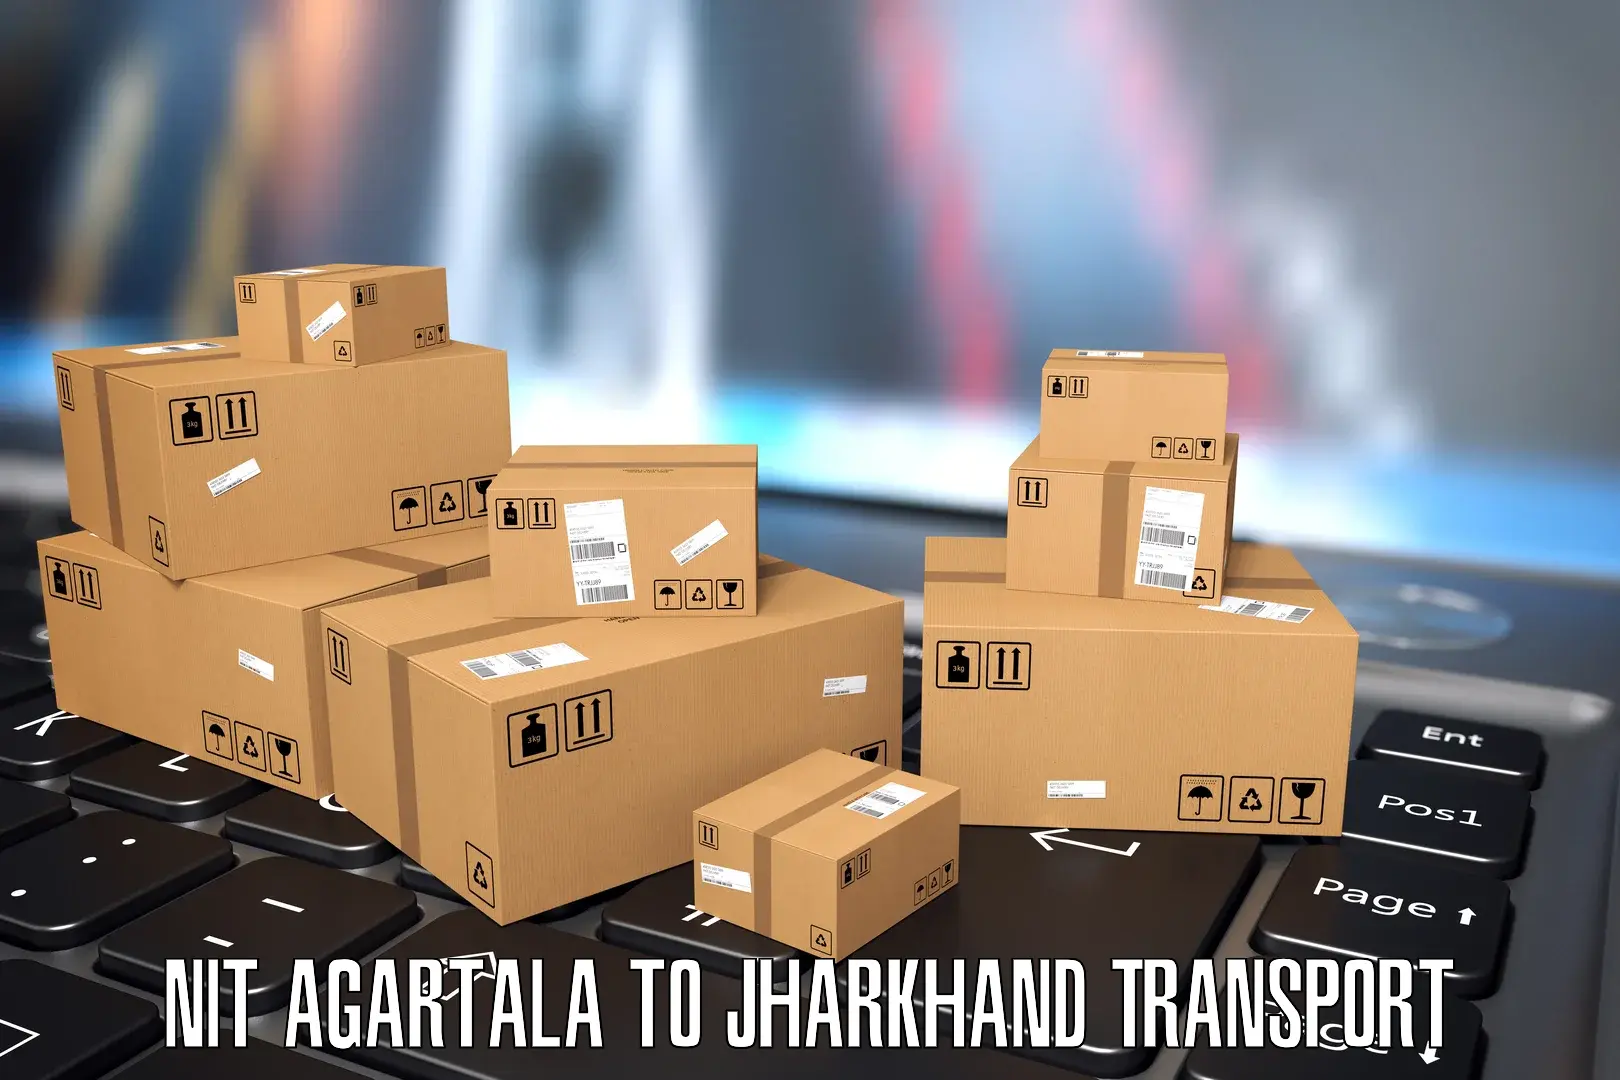 Container transport service NIT Agartala to Domchanch